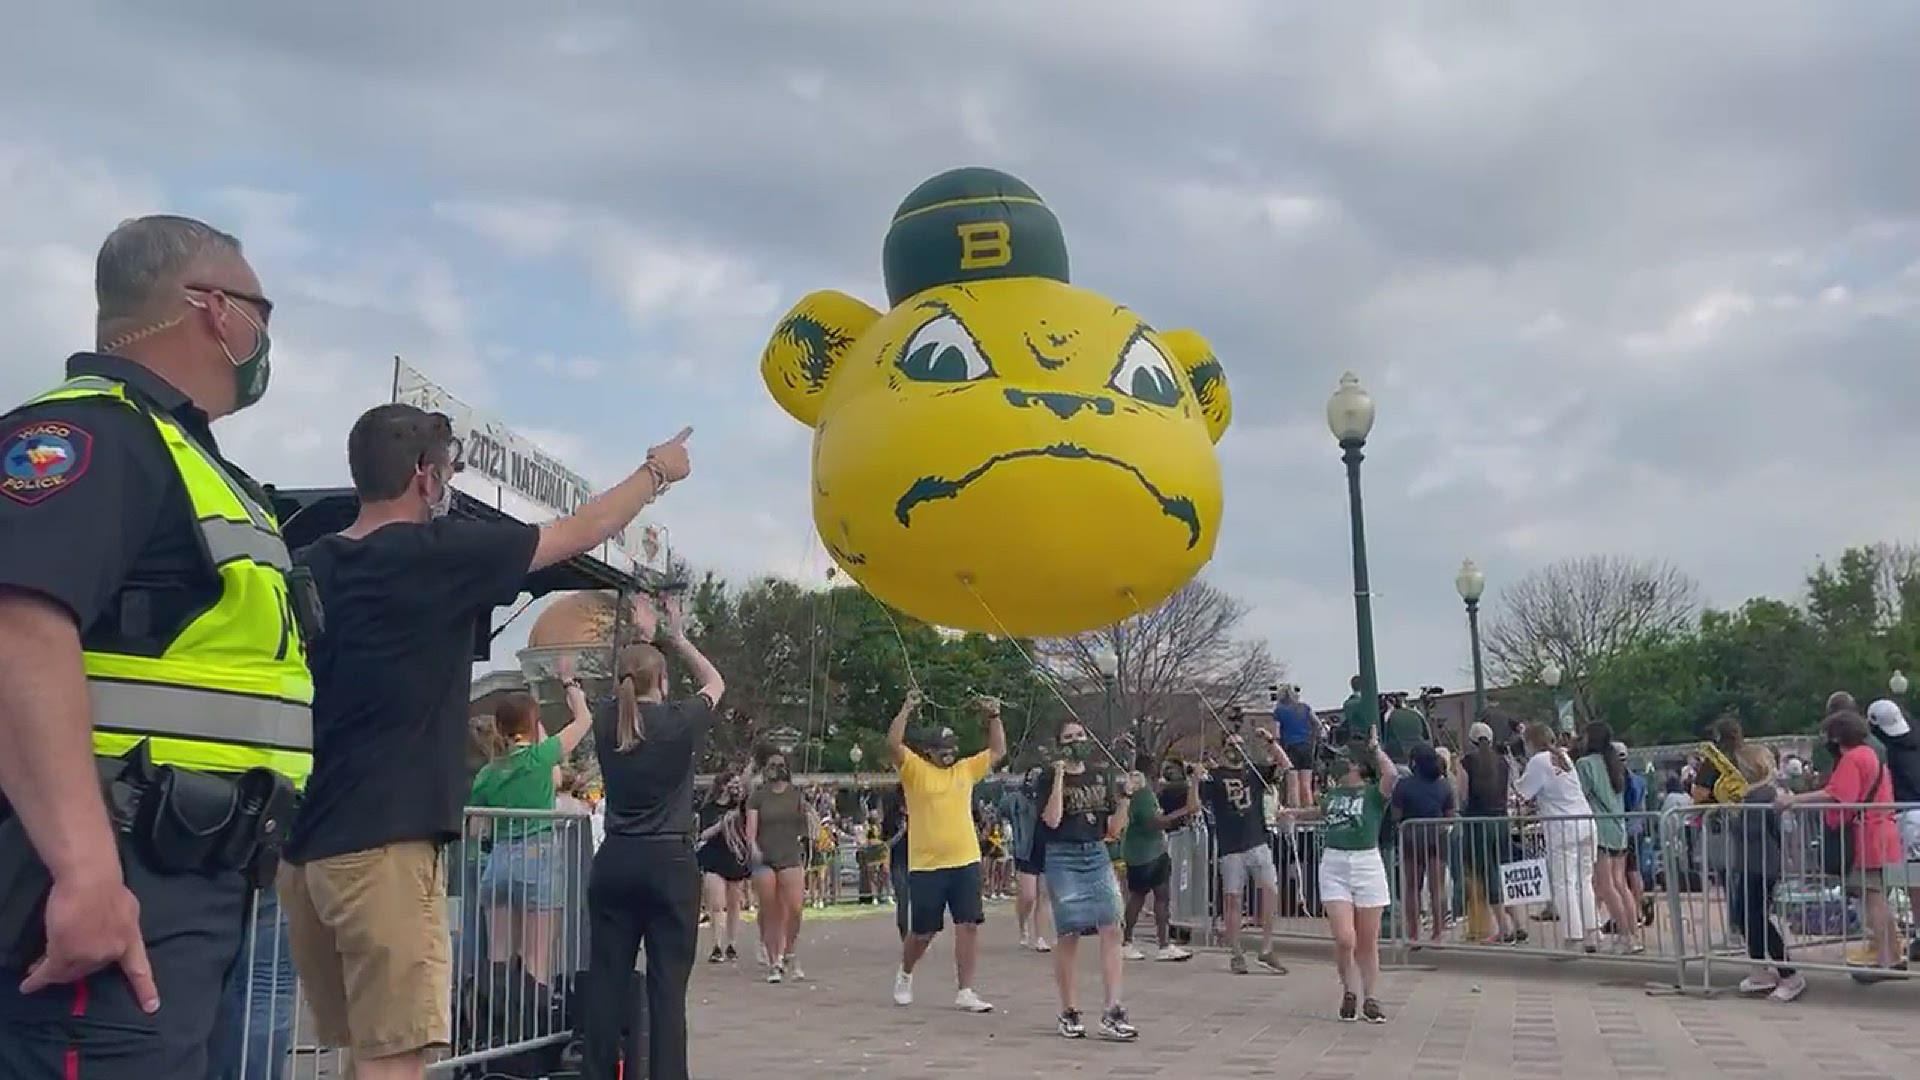 Of course the Baylor Bears mascot (in balloon form) marched in the parade honoring the men's basketball team's National Championship win!
Credit: Lyndie Miller